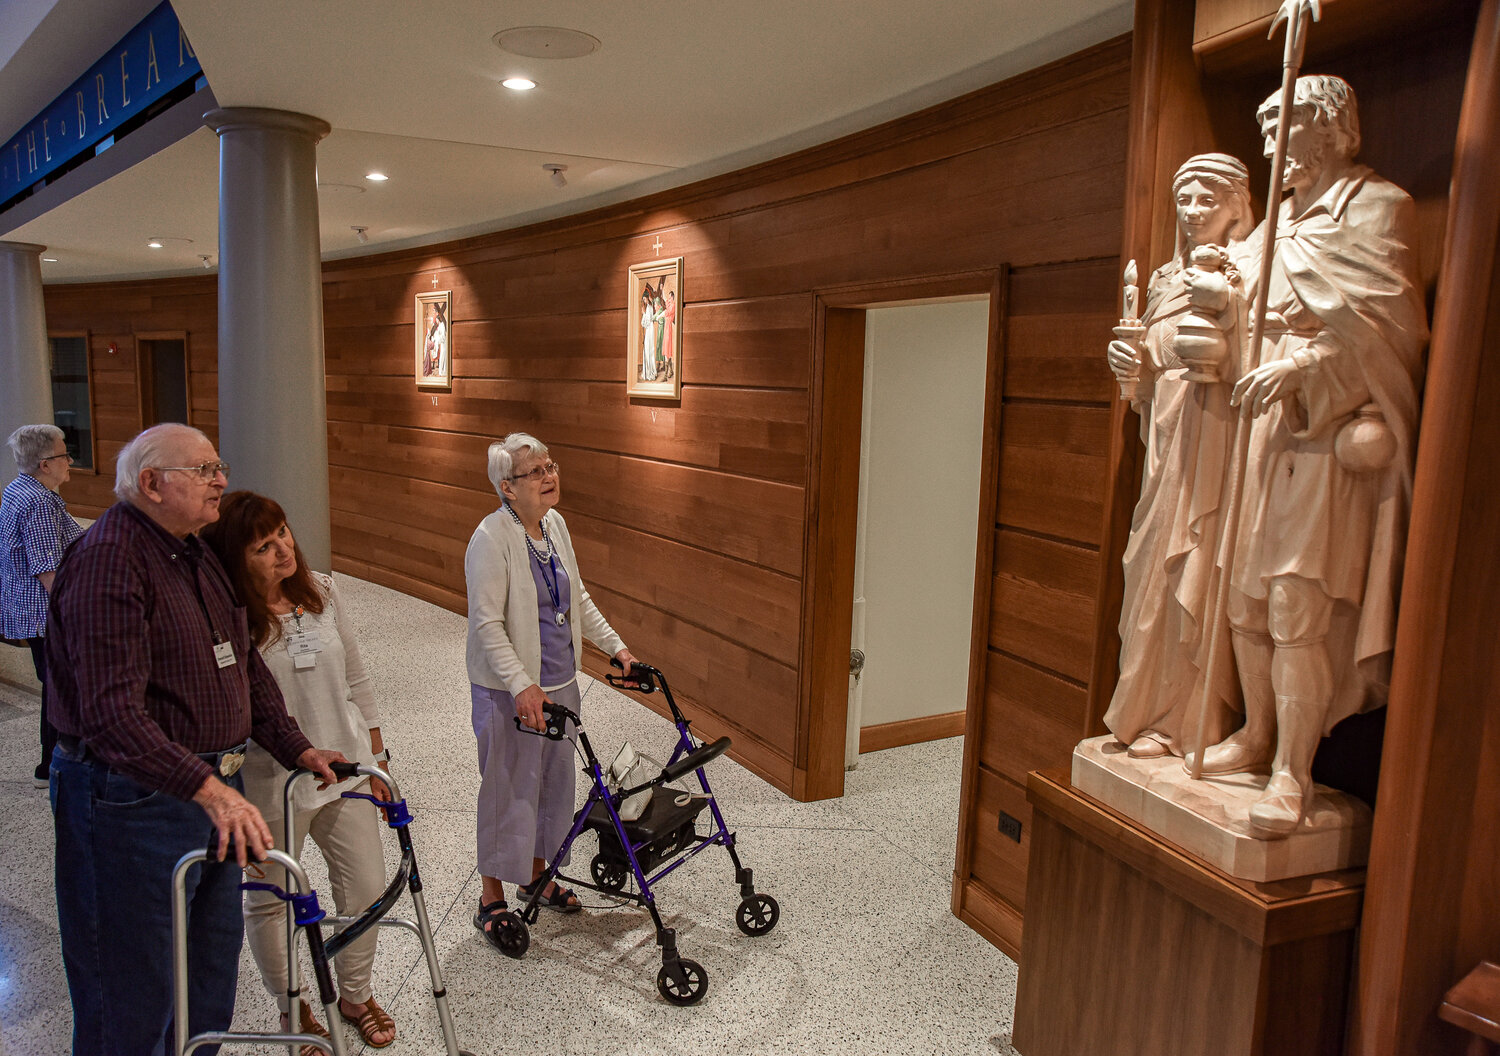 Howard Schneider, left, Rita Rivera and Maxine Walker notice the lifelike eyes of the statues, carved into lindenwood from the Black Forest in Germany. The sculptures are of St. Isidore and his wife Blessed Maria. Isidore is the patron saint of farmers and day laborers and was known for his compassion and kindness. He is said to have brought people home to feed and his wife Maria blessed the hungry with a meal. Rivera serves as director of life enrichment at Heisinger Bluffs and toured the newly renovated Cathedral of St. Joseph Monday with several residents Monday.